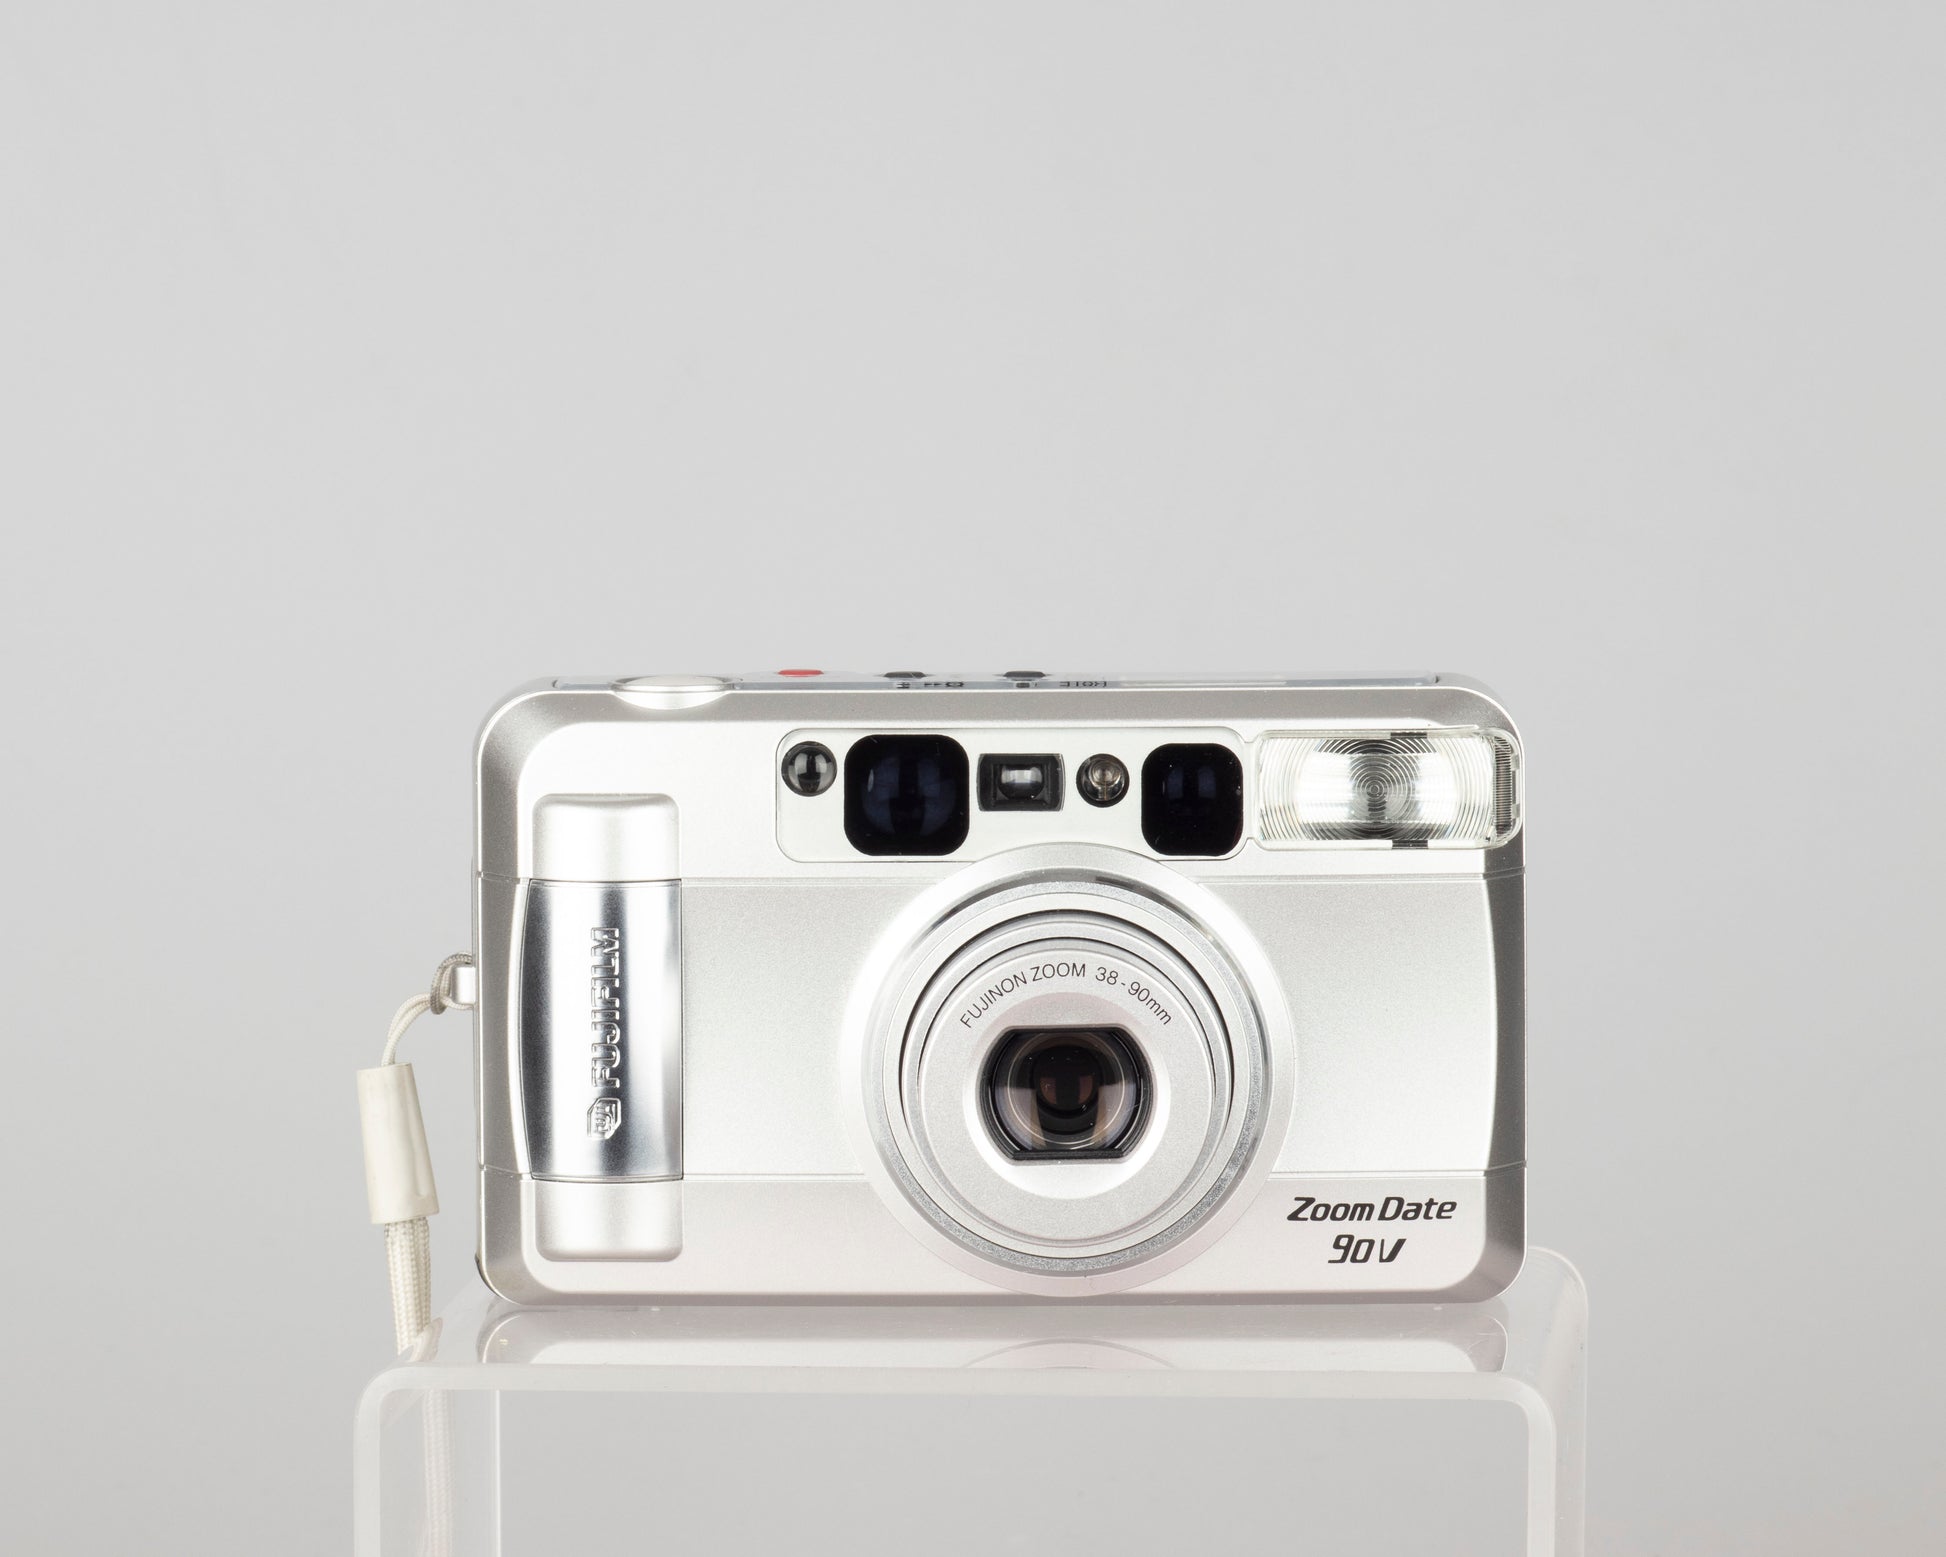 The Fujifilm Zoom Date 90V is a 35mm film point-and-shoot camera from the 2000s